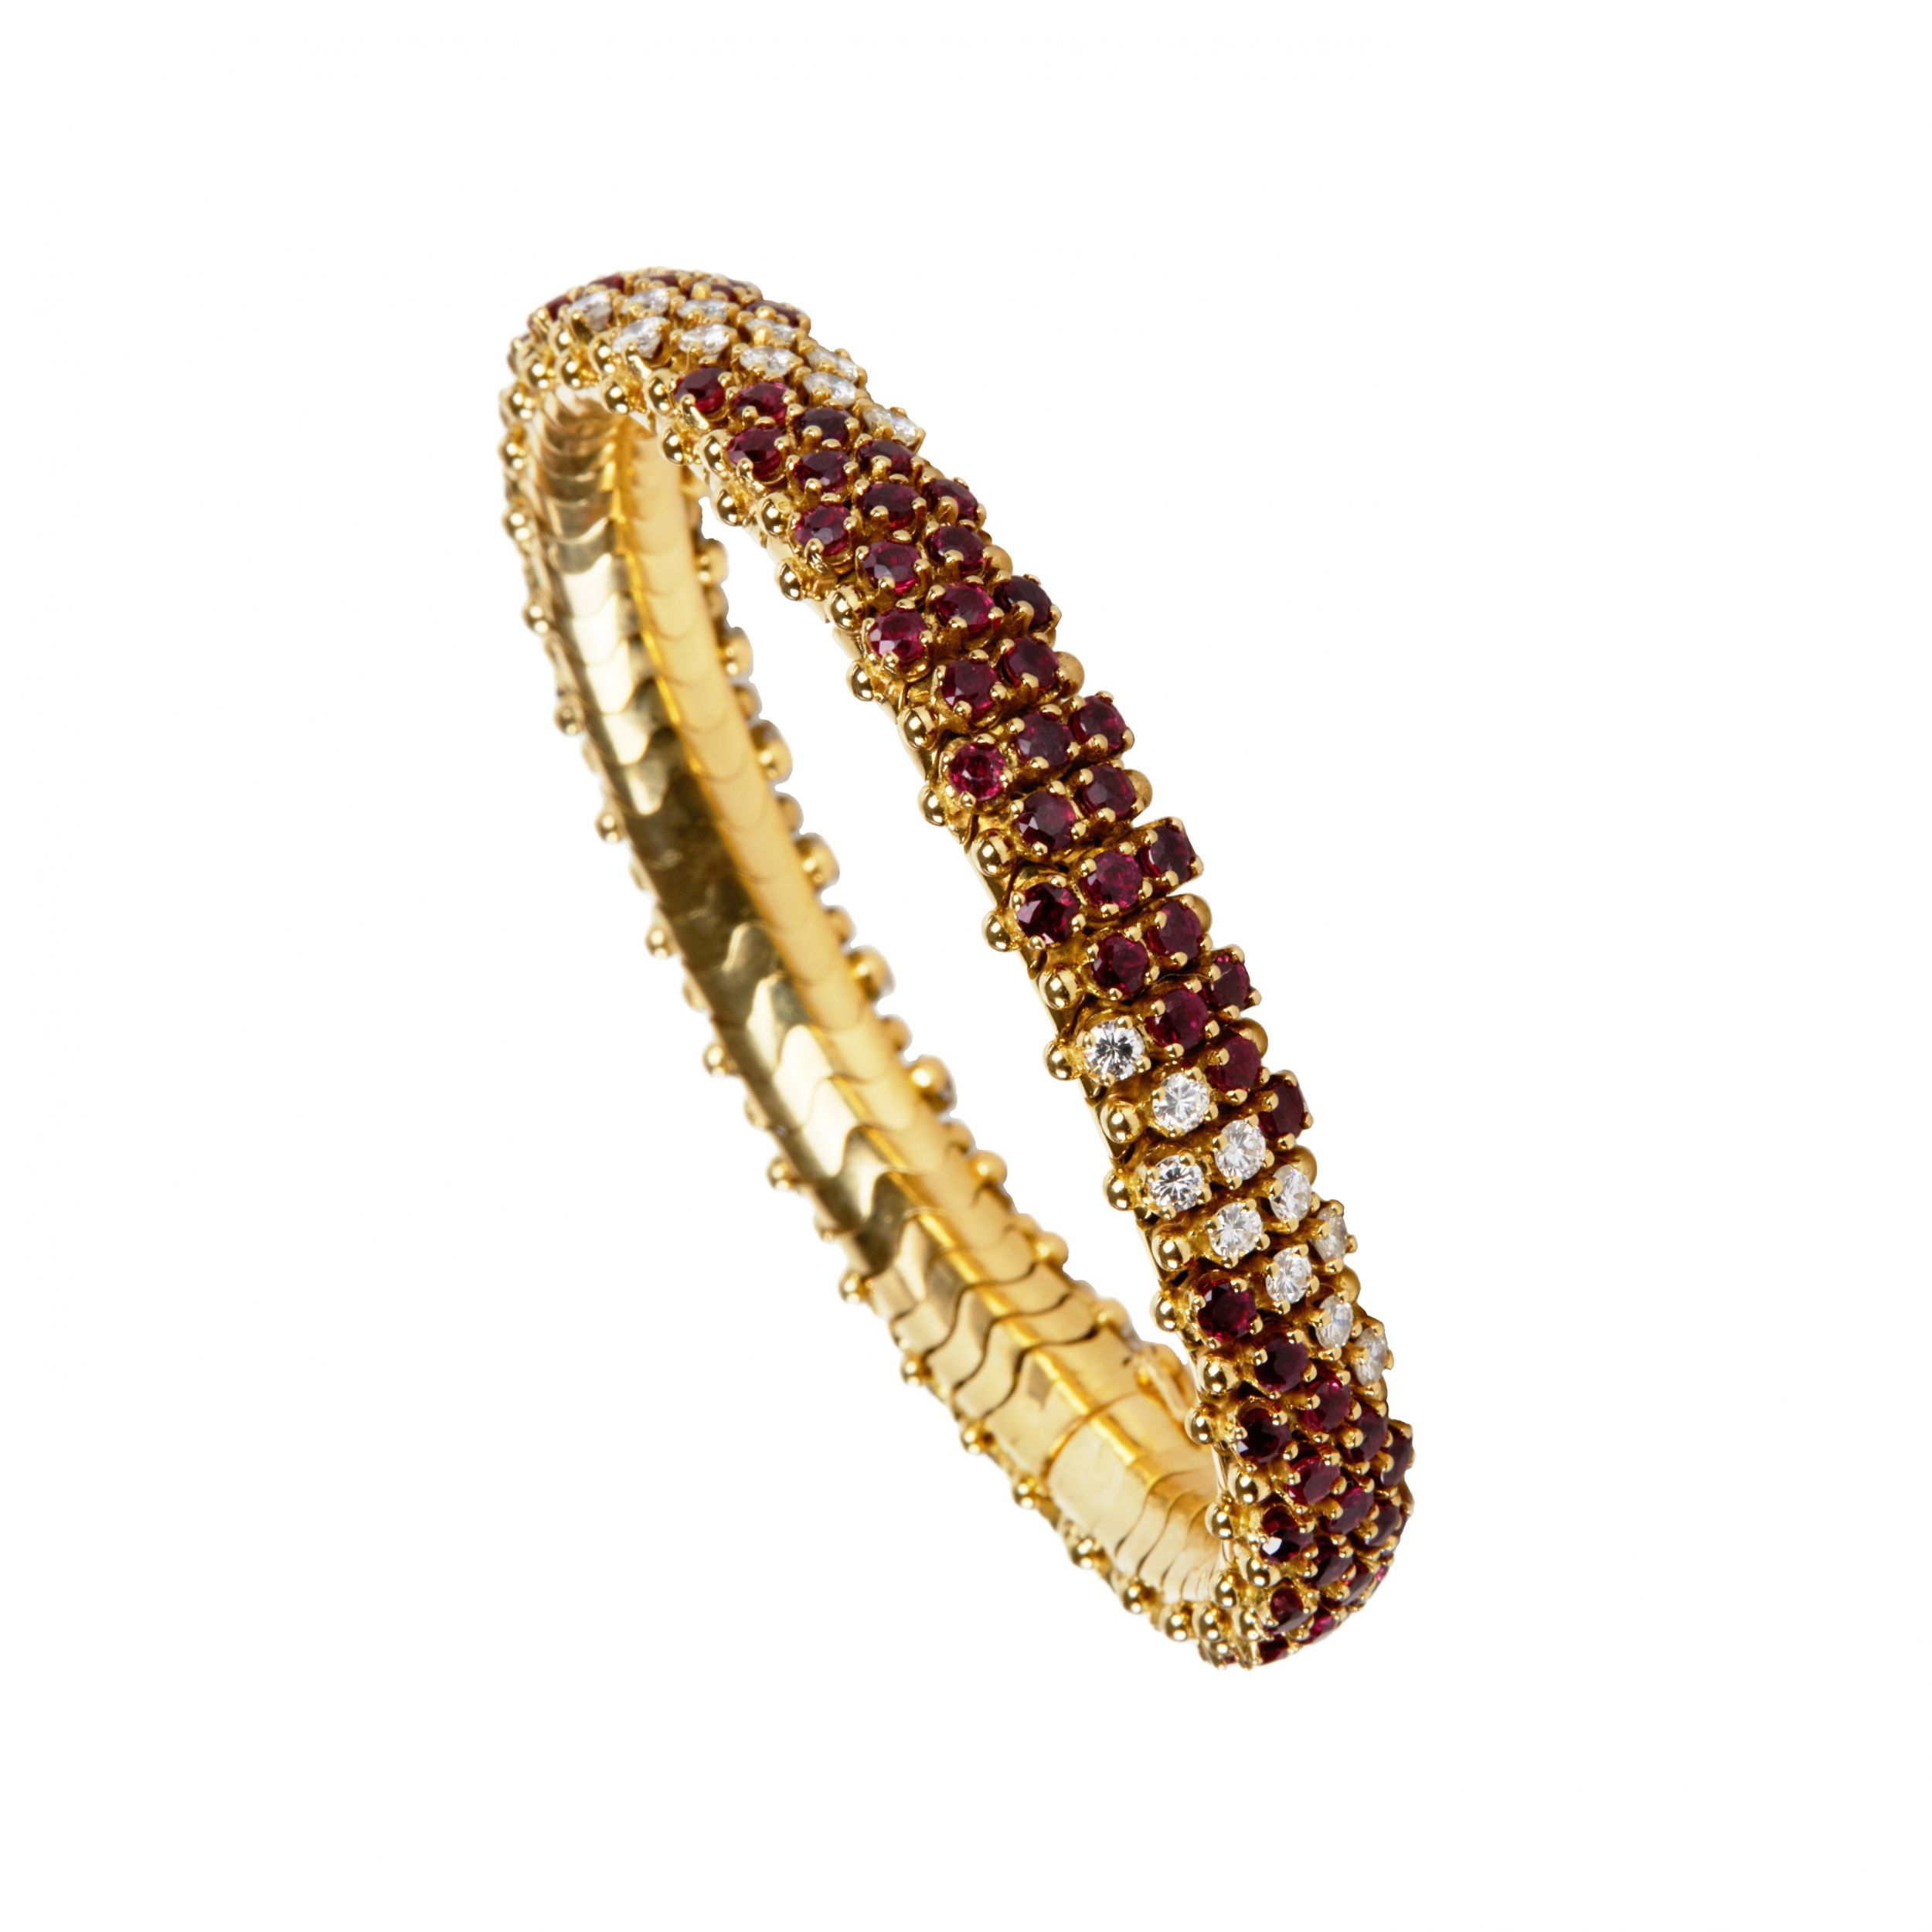 Gold-bracelet-with-rubies-and-diamonds-